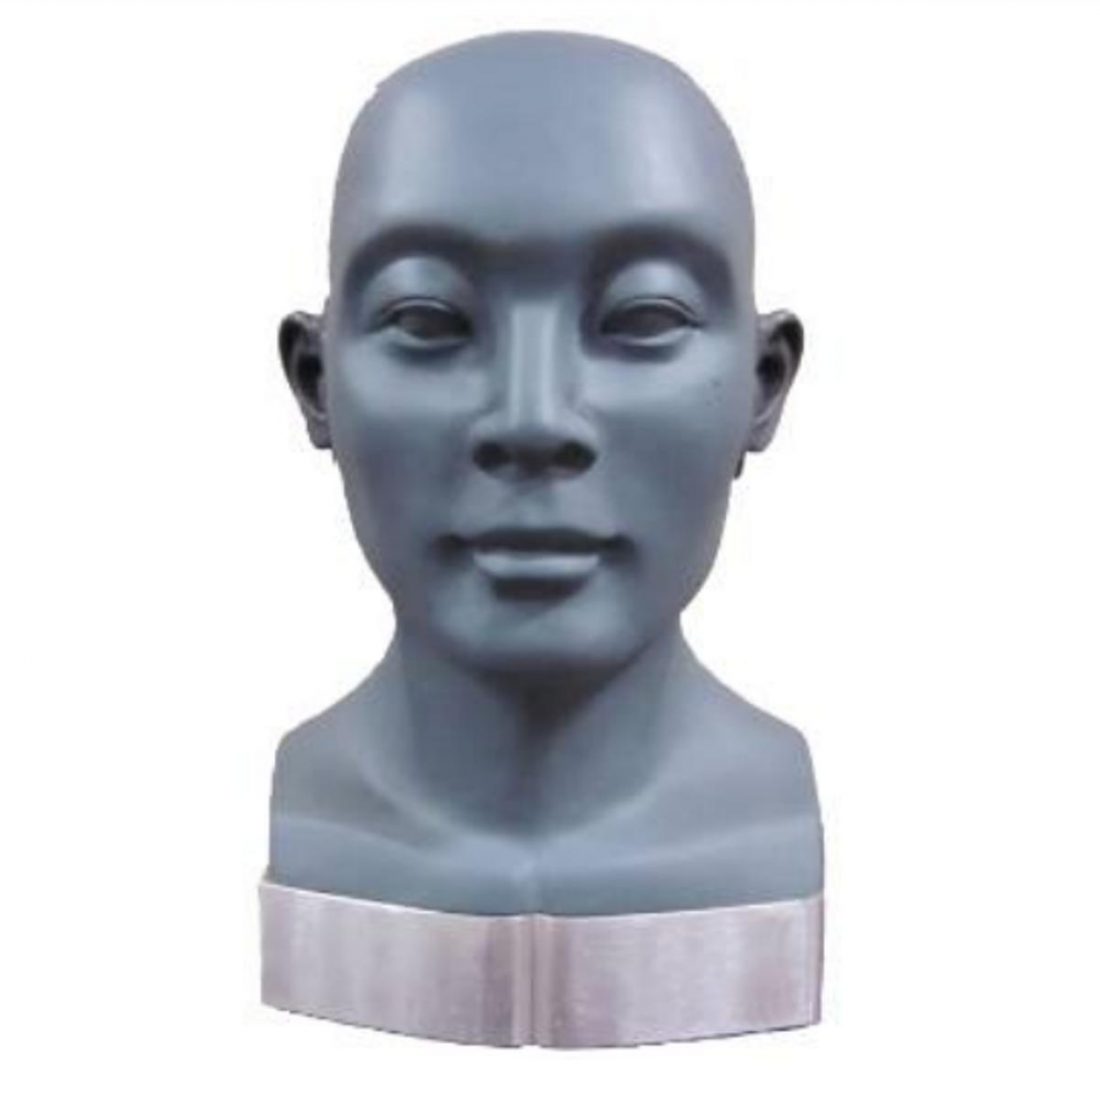 Chinese researchers identified a distinct subset of facial features and structure for East Asians, especially those of Chinese descent. This is BHead210, the resulting dummy head. It is clearly different from the GRAS that has been pictured above. (From: Ling Tang, Zhong-Hua Fu and Lei Xie)